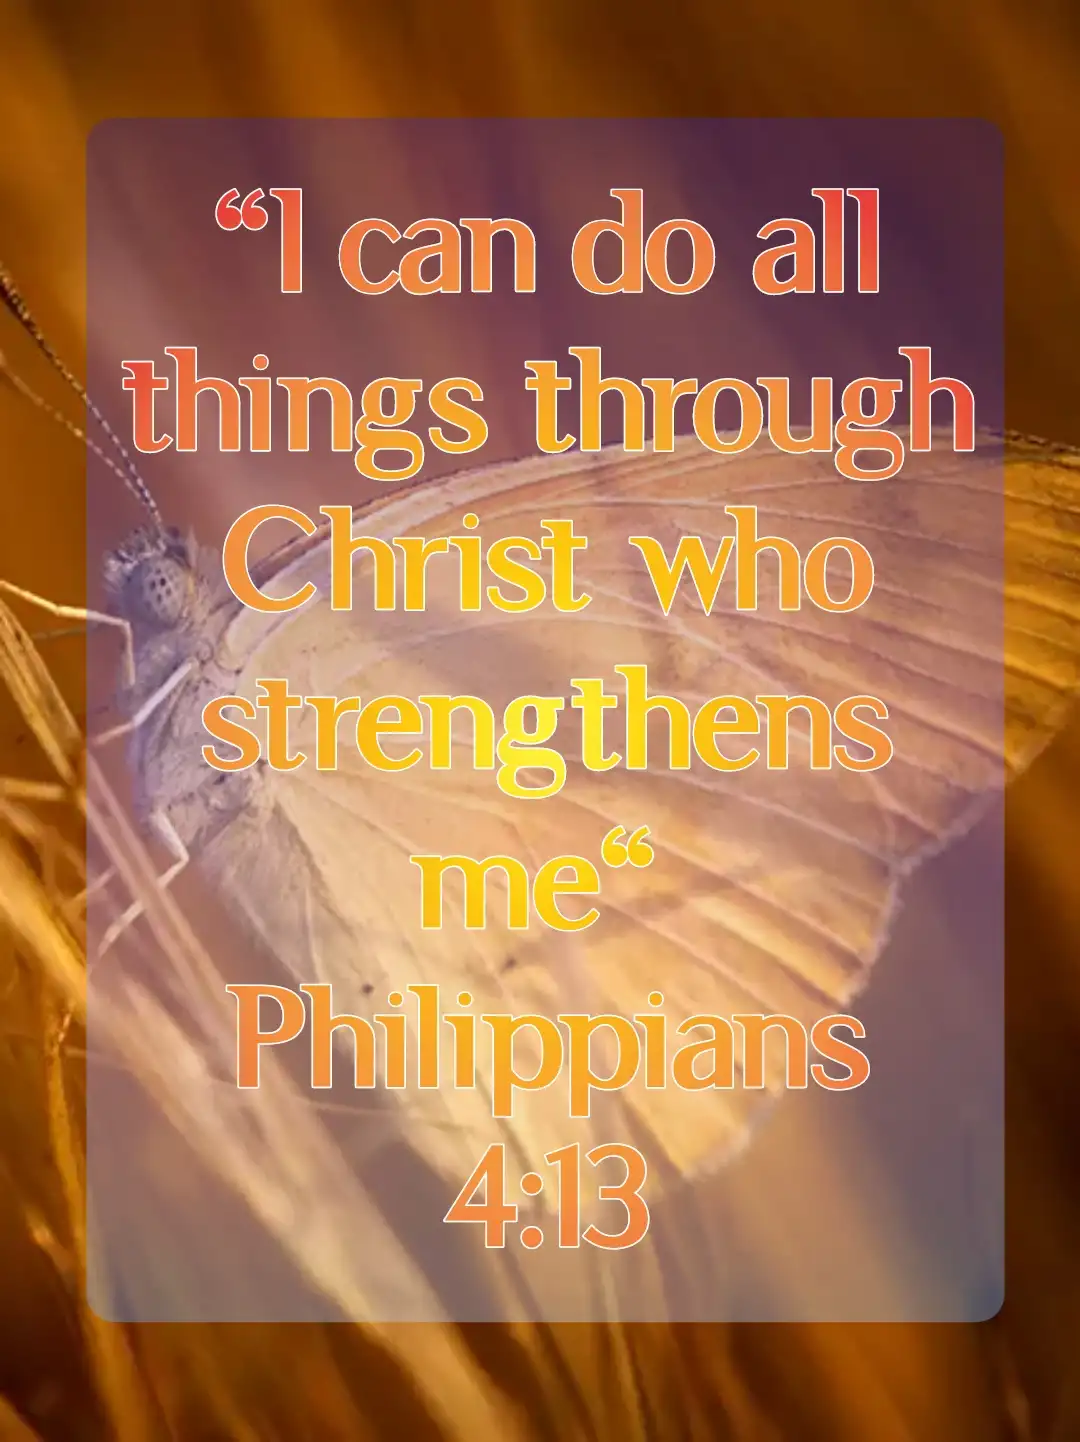 ible Verses About Doing Good (Philippians 4:13)